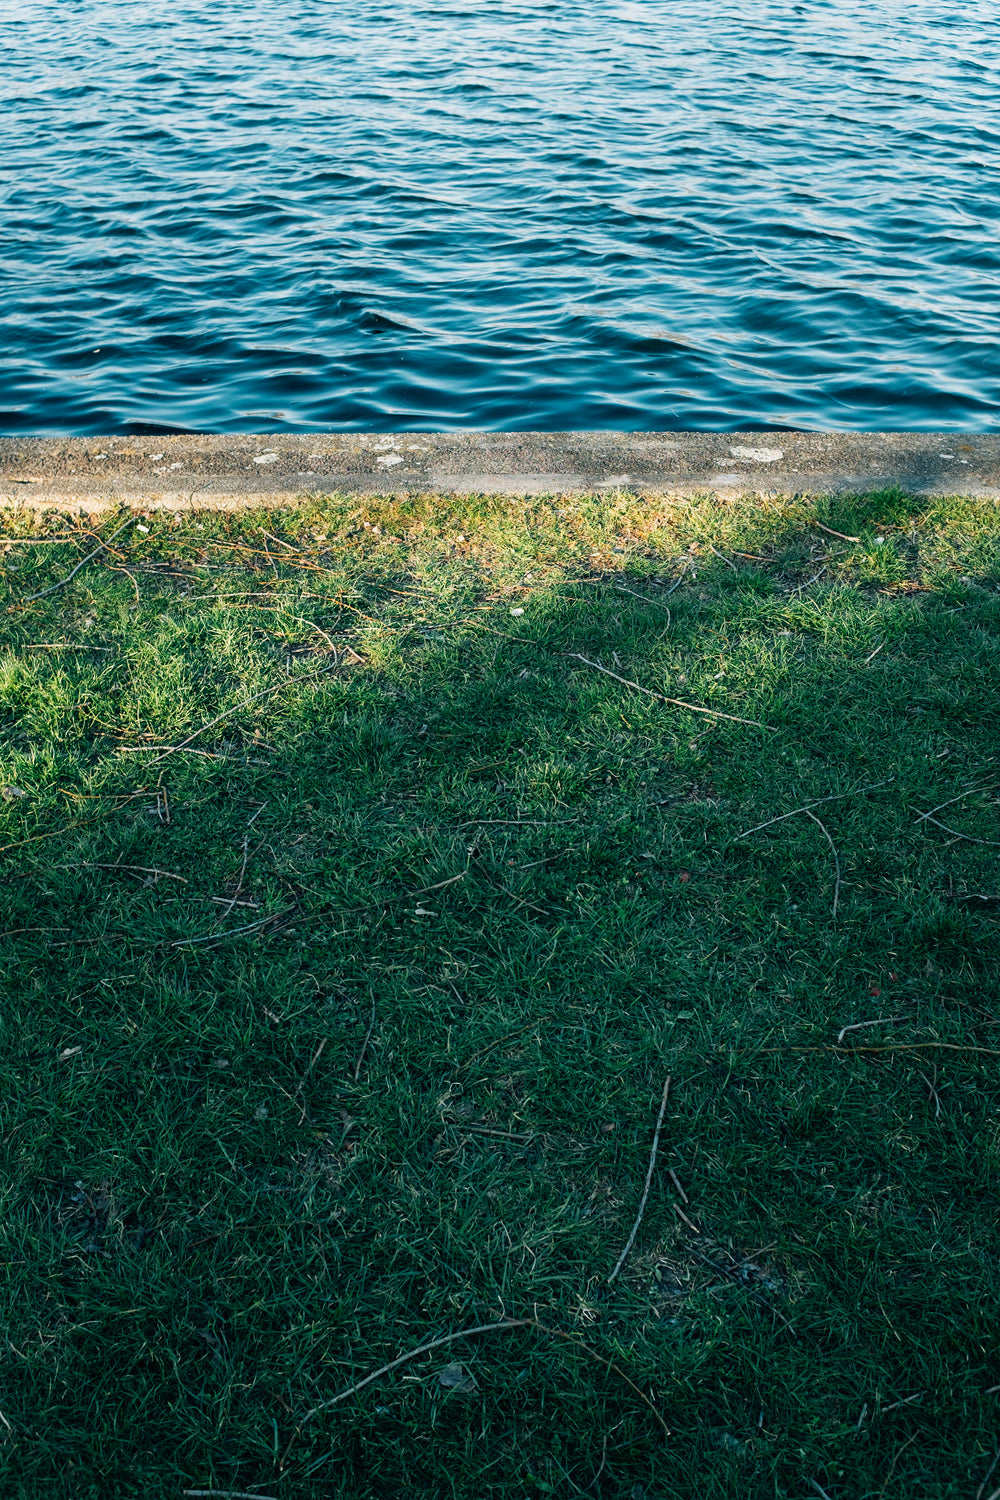 grassy edge by calm blue water